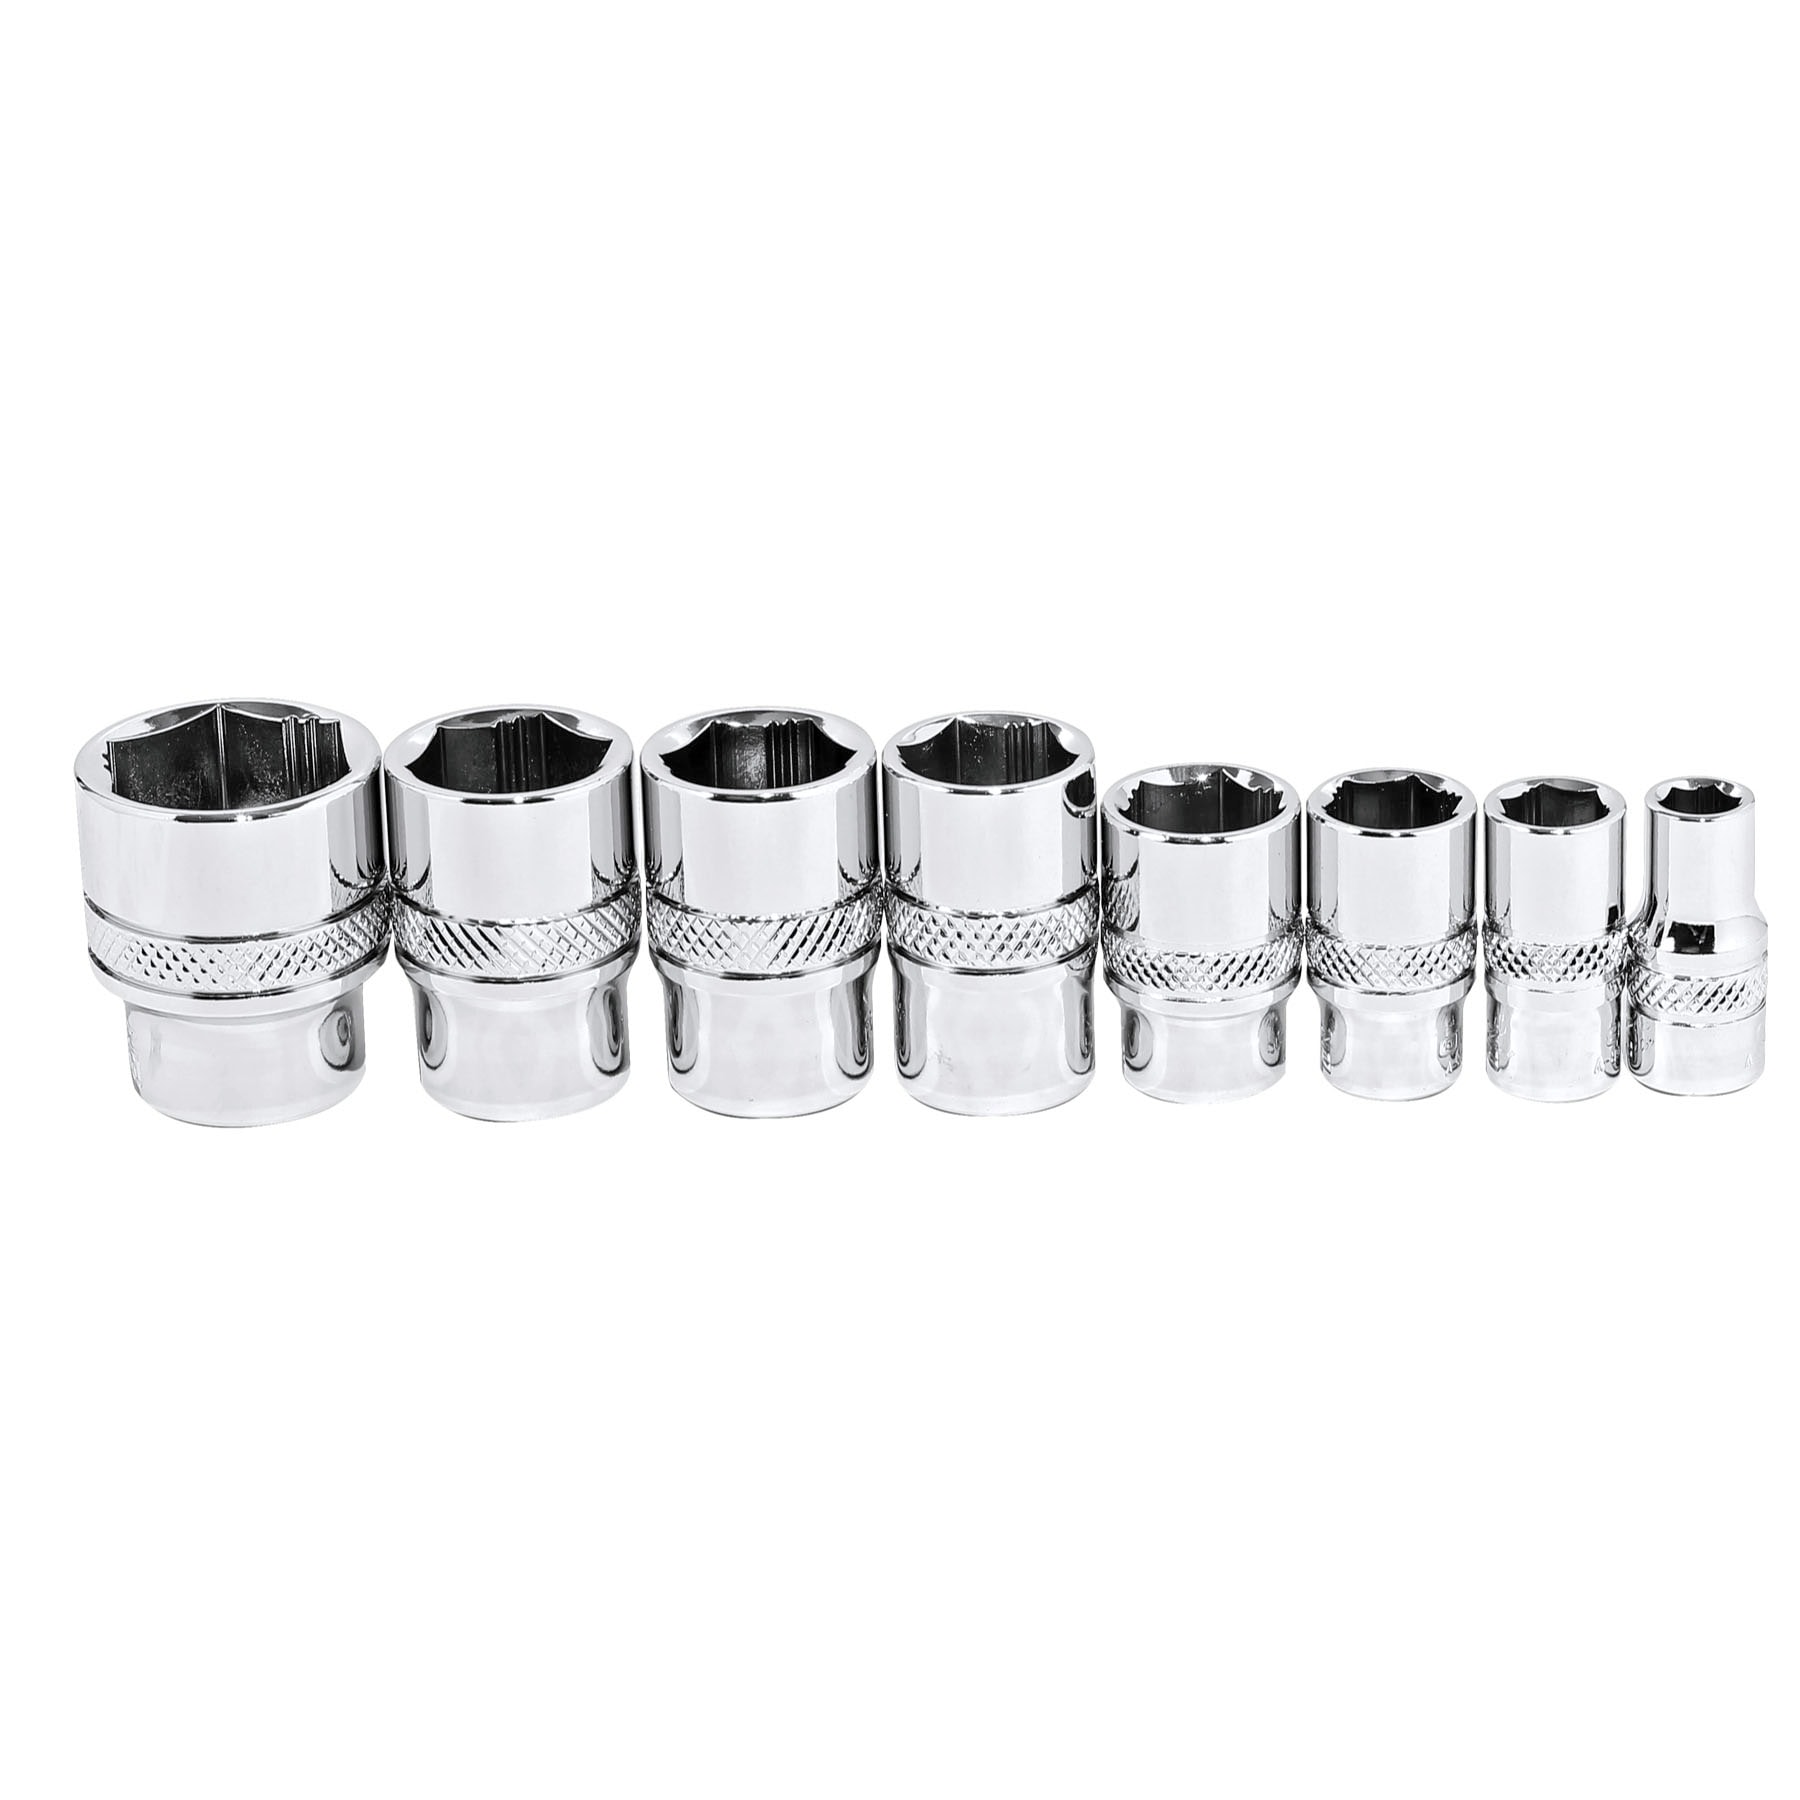 CRAFTSMAN 11-Piece Metric 3/8-in Drive 6-point Set Shallow Socket